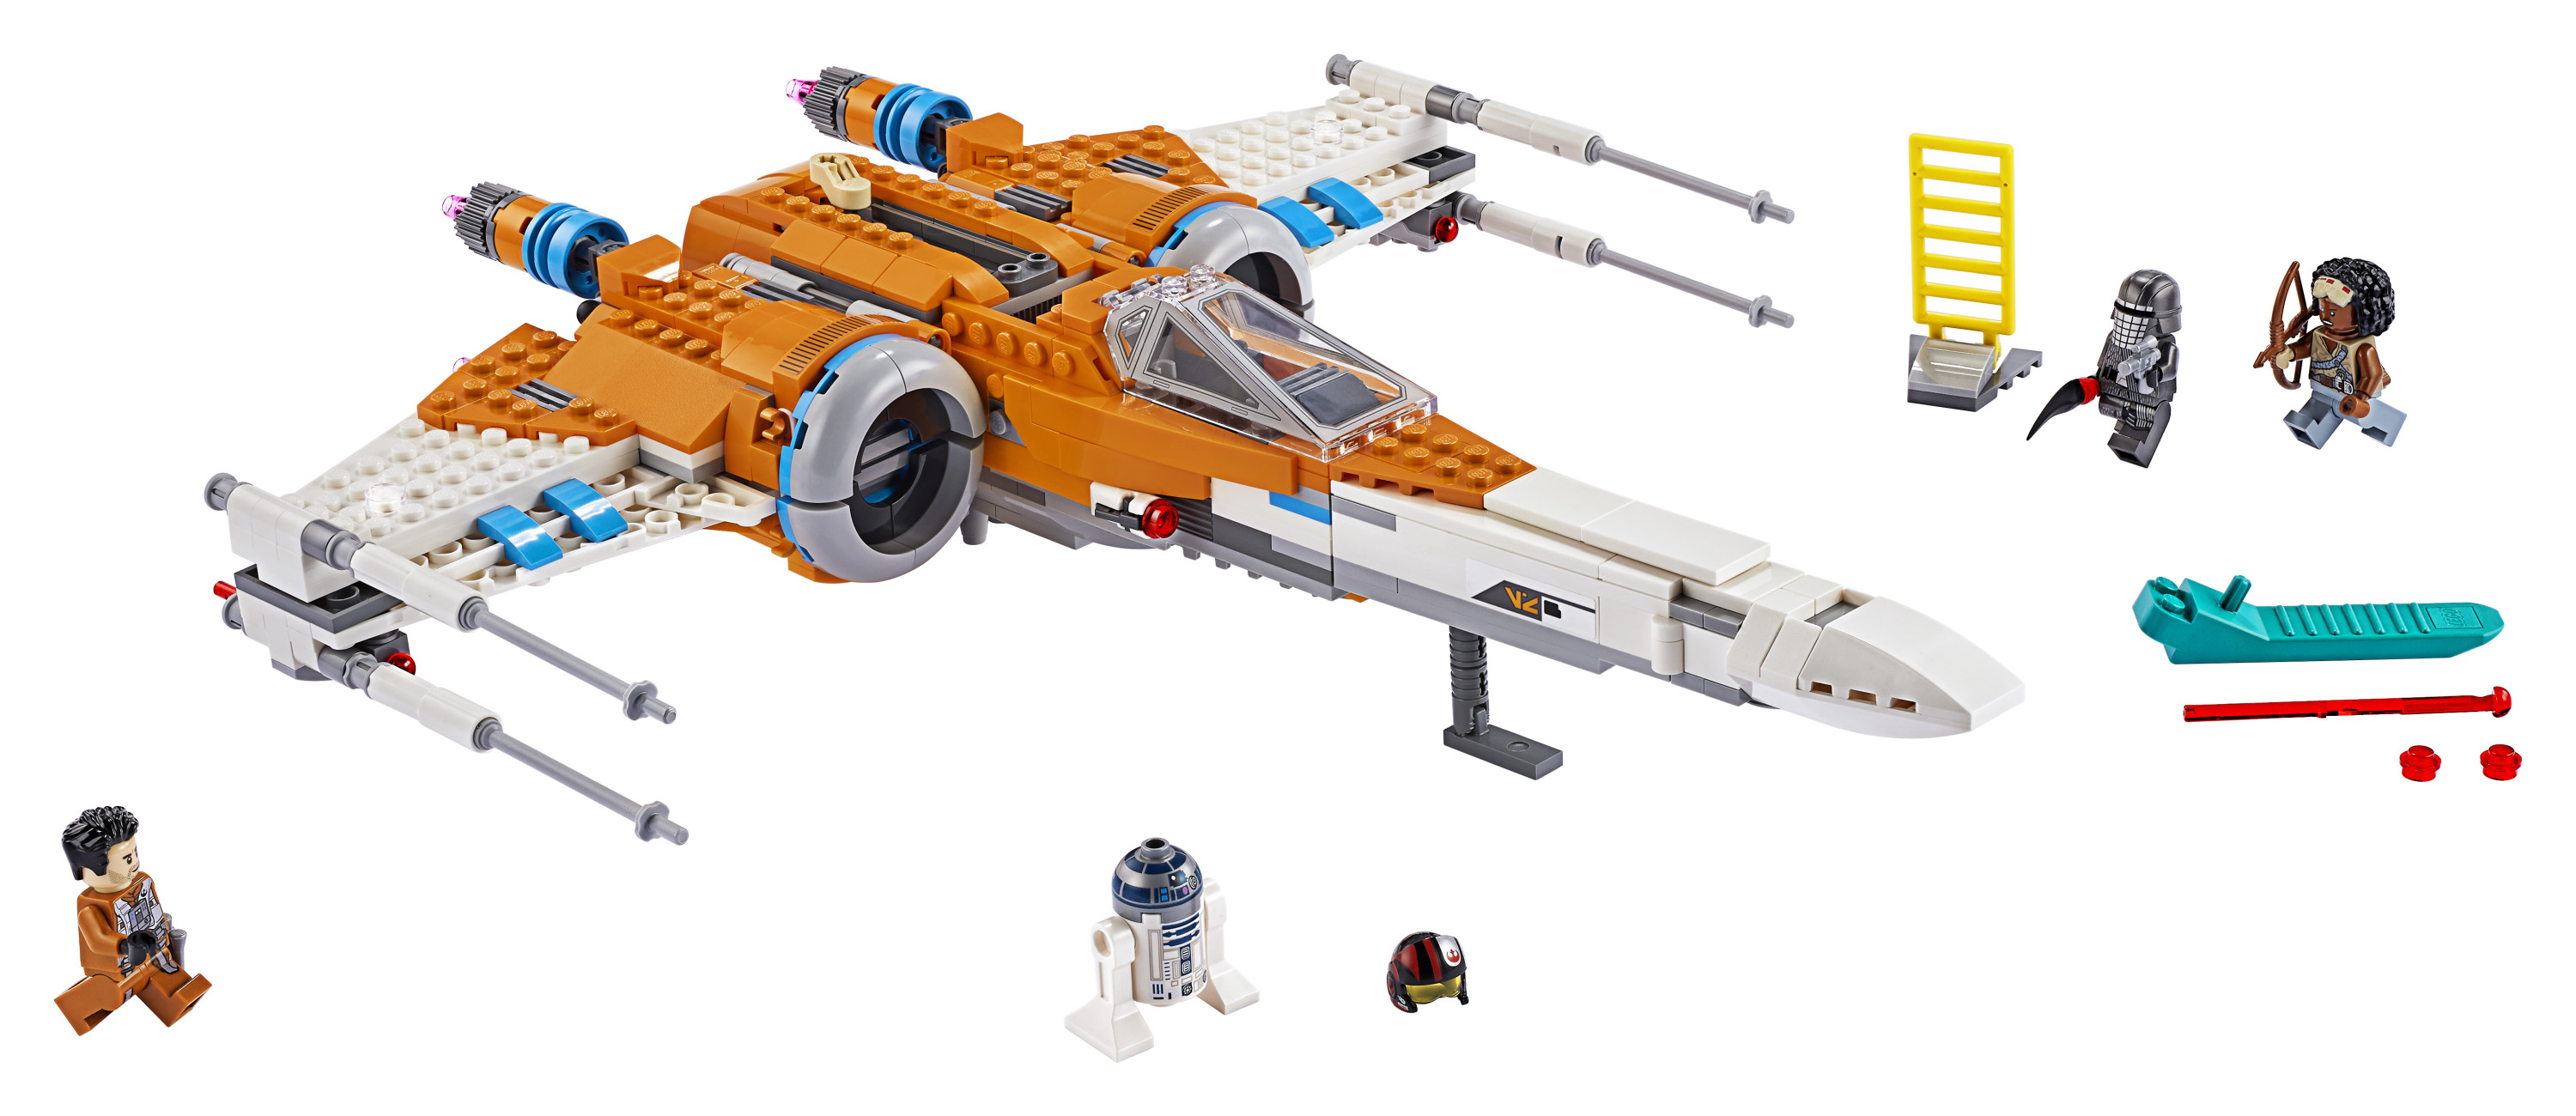 LEGO 75273 Star Wars Poe Dameron's X-wing Fighter Building Kit, 761 Pieces - image 3 of 7